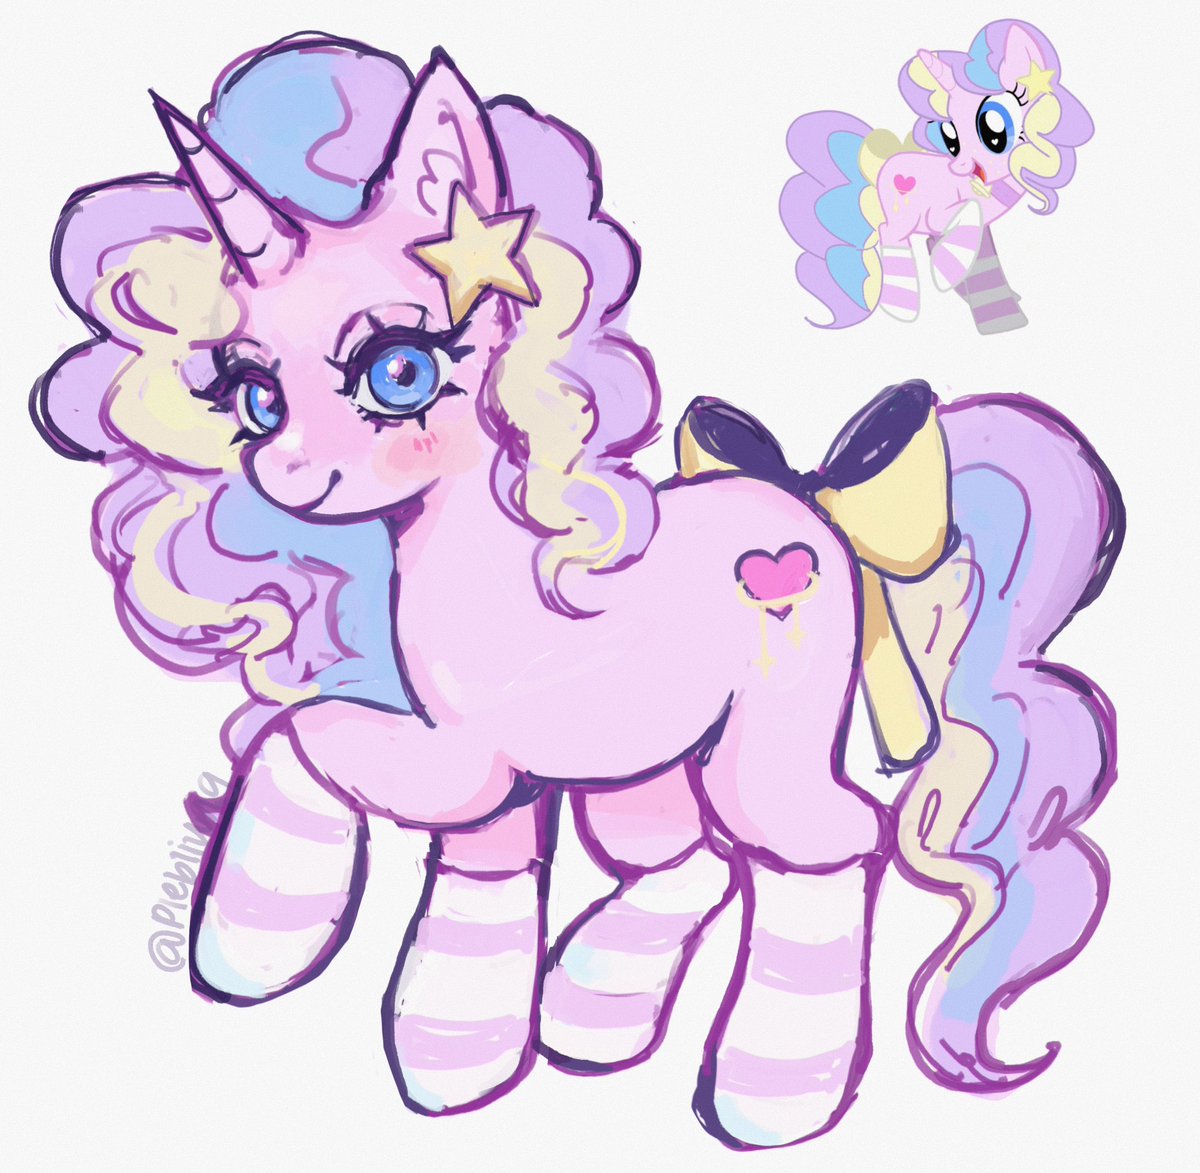 drew @SweatyLampshade’s OC | my gift to you for earlier 🎁💞

#mlp #mlpfanart #mlpoc